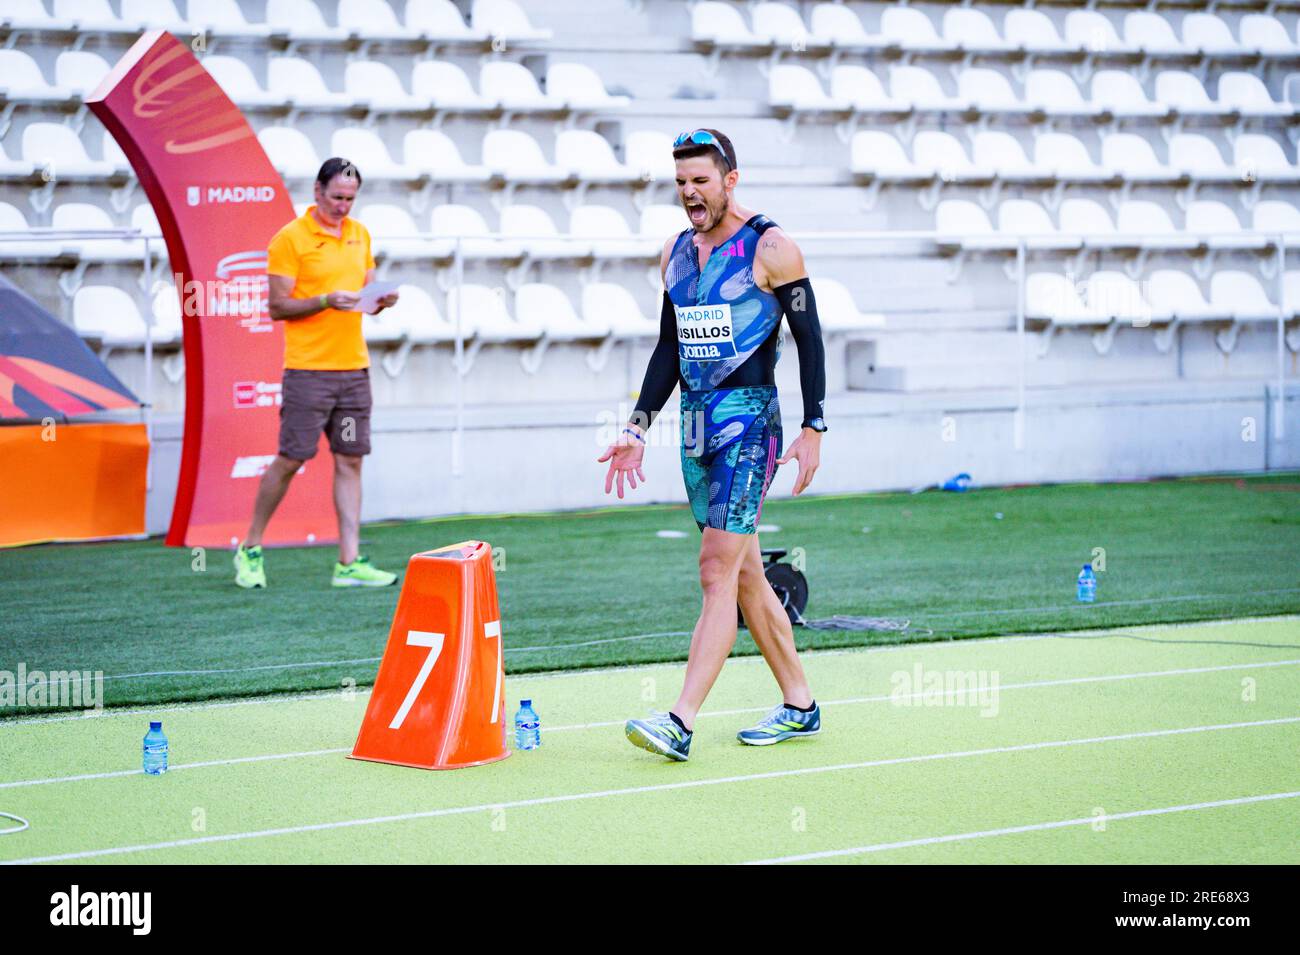 Oscar Husillos before the men 400 metres sprint race final during the WACT/Europe Silver Athletics Meeting celebrated in Madrid at Vallehermoso stadium. Stock Photo